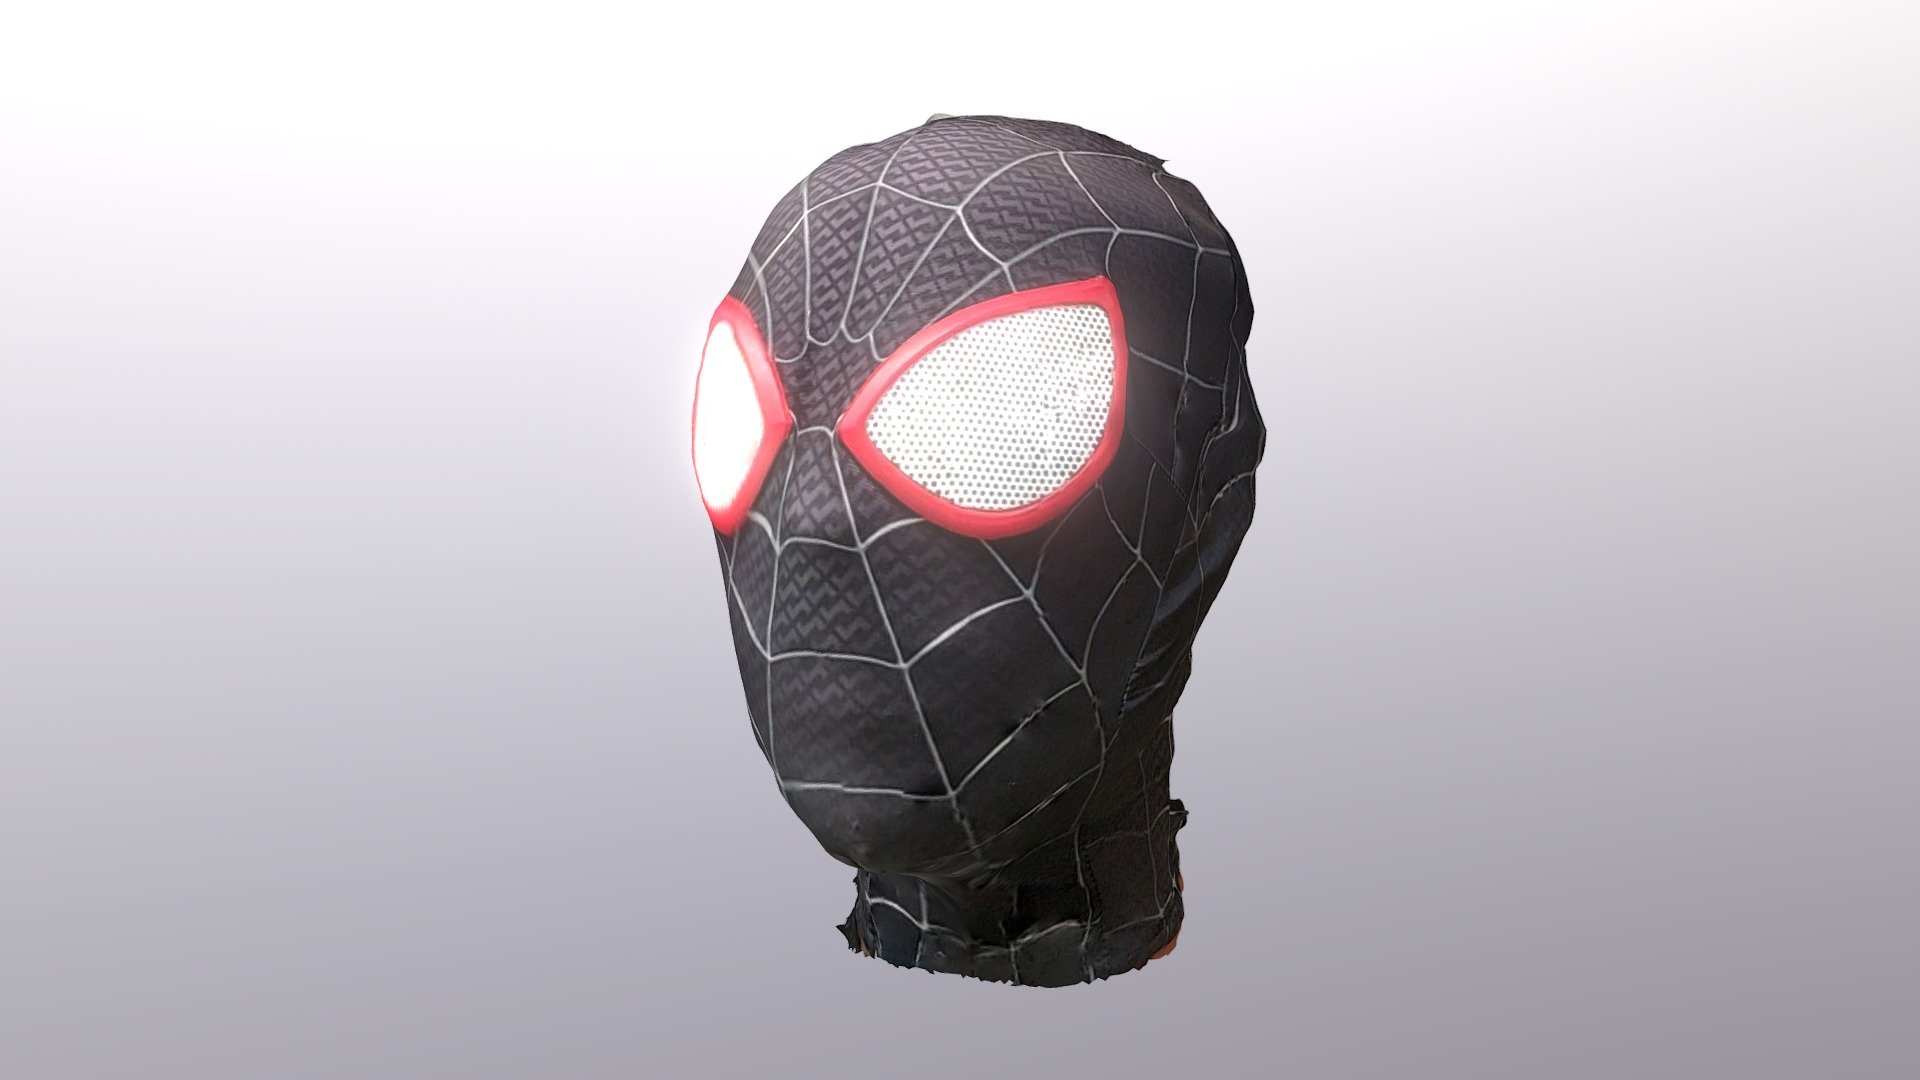 Scanned with 3D Live Scanner and the Samsung Galaxy S21 Ultra.

From https://en.wikipedia.org/wiki/Miles_Morales :

Miles Morales first appeared in Ultimate Fallout #4 (Aug. 2011), following the death of Peter Parker. The 13-year-old biracial teenage son of a Black American father and a Puerto Rican mother, he is the second Spider-Man to appear in Ultimate Marvel, an imprint with a separate continuity from the mainstream Marvel Universe. He was featured in the Ultimate Comics: Spider-Man comic book series, and after Marvel ended the Ultimate imprint in 2015, Miles was made a character in the main Marvel Universe, beginning with stories under the All-New, All-Different Marvel branding that debuted that same year. The character was not the lead character in the Ultimate Spider-Man animated TV series on Disney XD but he was later added to the main cast, and the main protagonist in the 2018 feature film Spider-Man: Into the Spider-Verse which won the Academy Award for Best Animated Feature 3d model